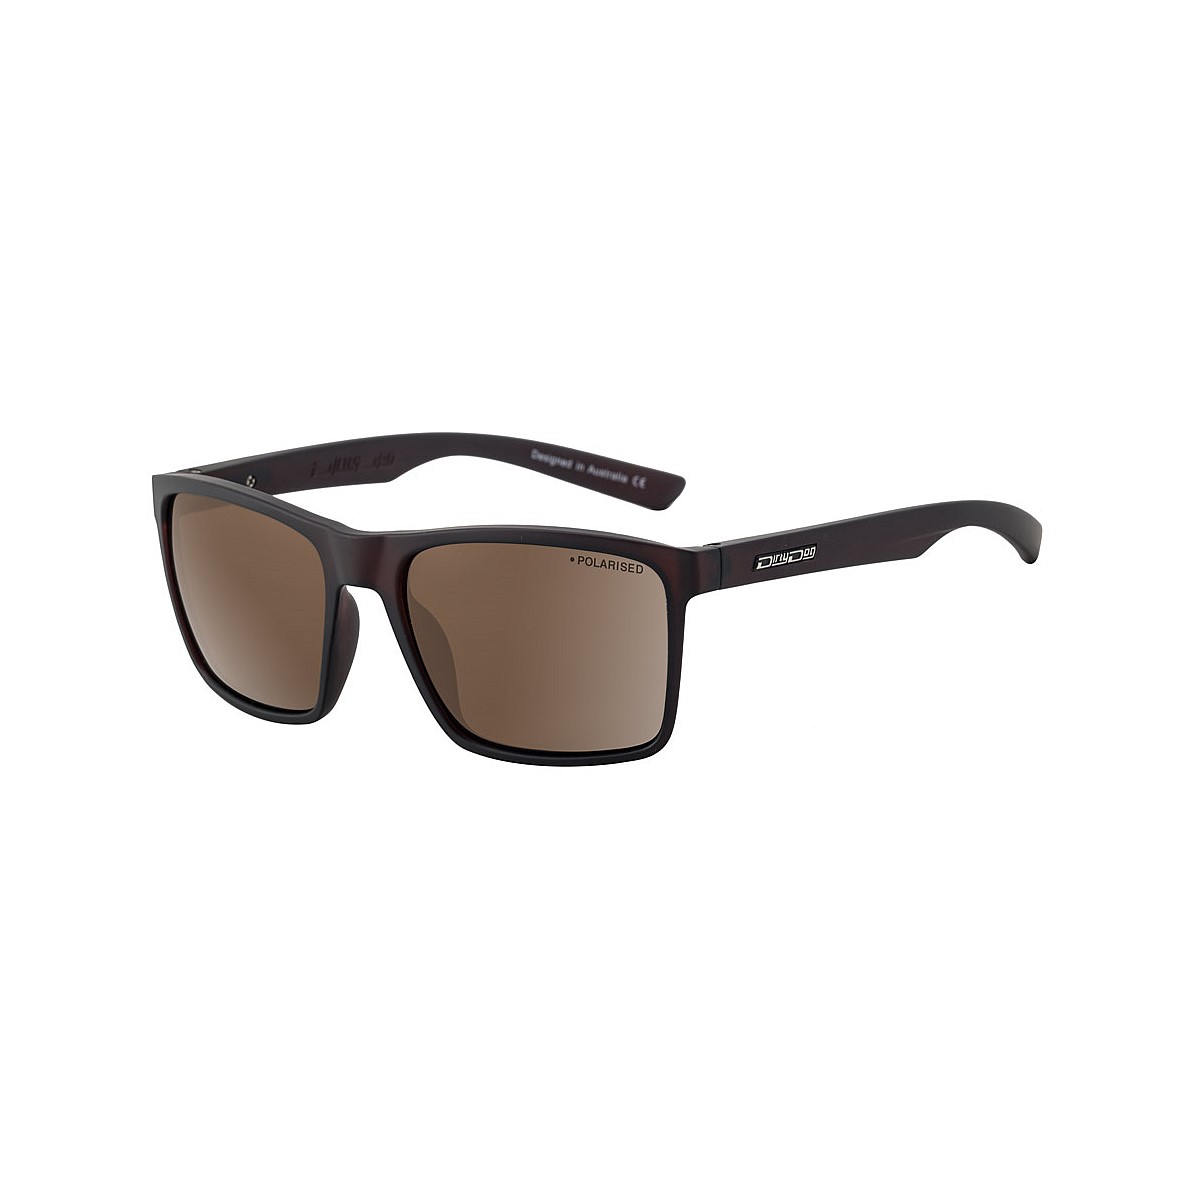 Men's Sunglasses Online | Air New Zealand's Airpoints™ Store